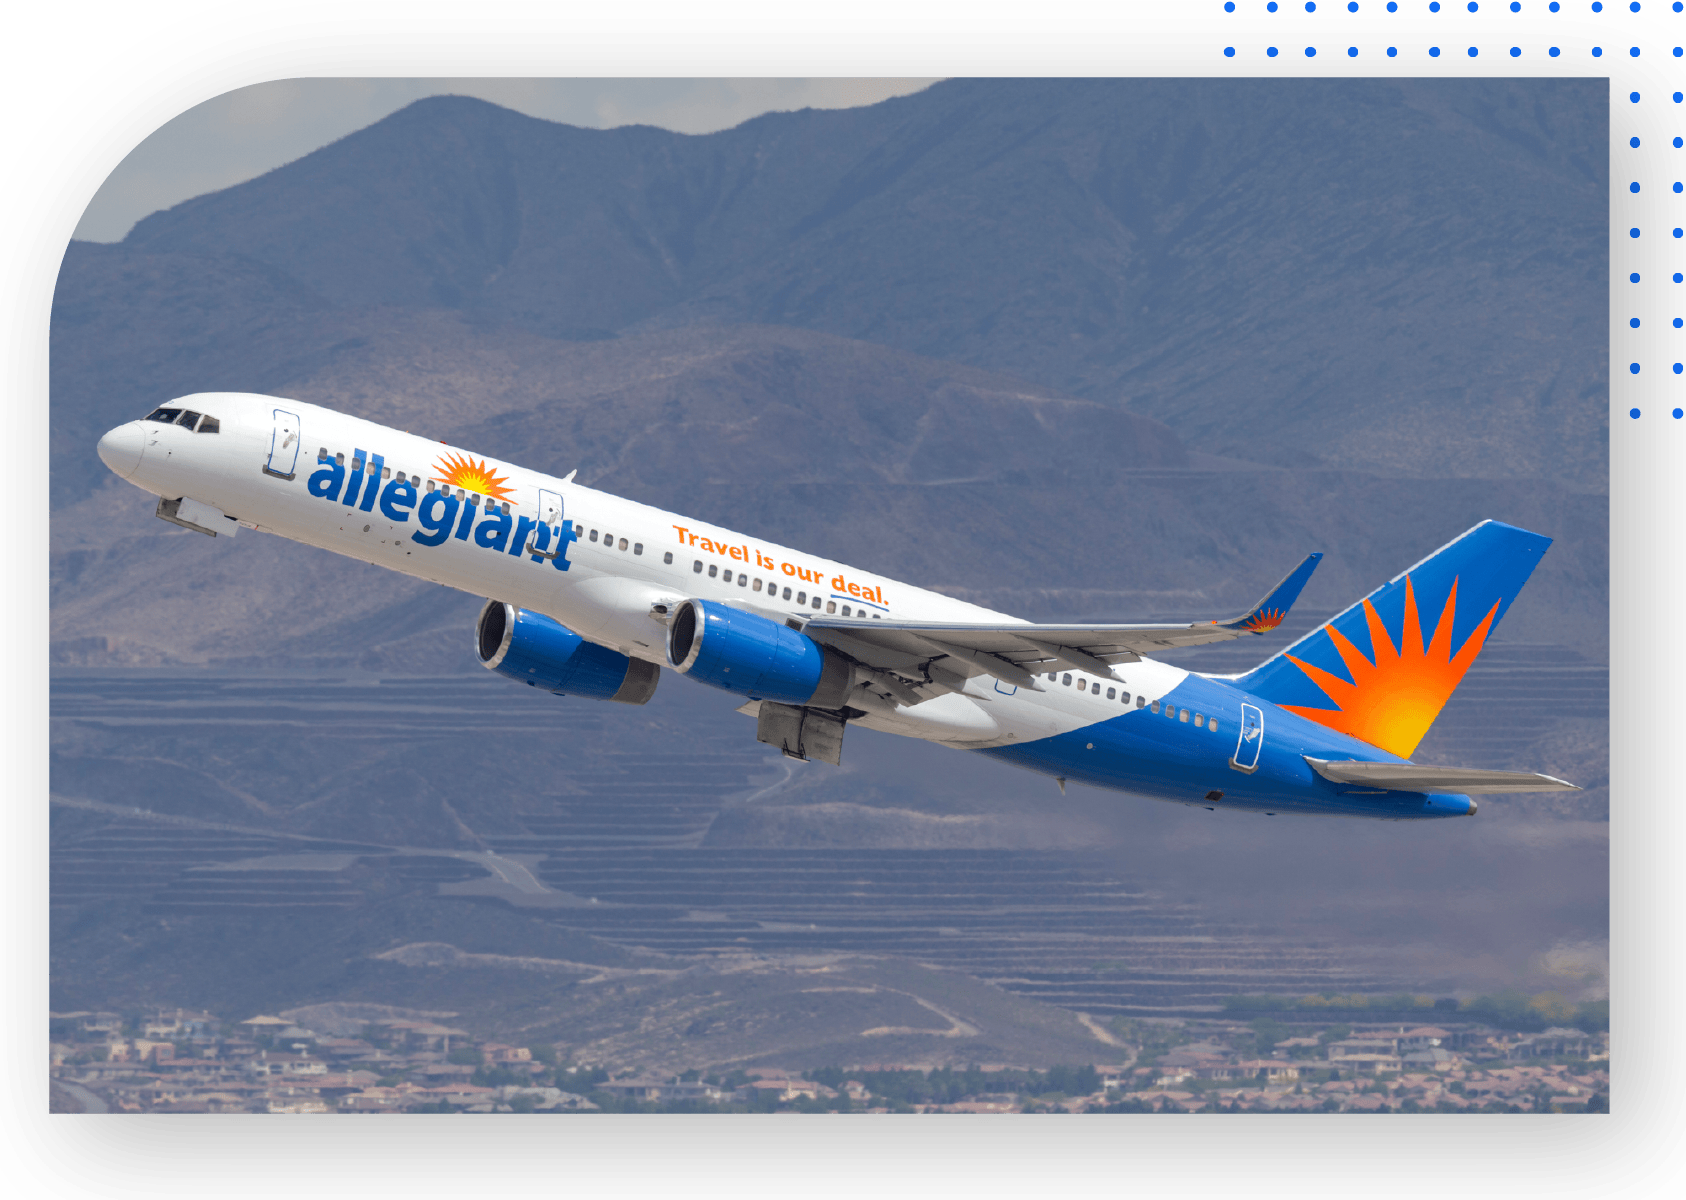 airline payment solutions for travel industry from Shift4 Allegiant